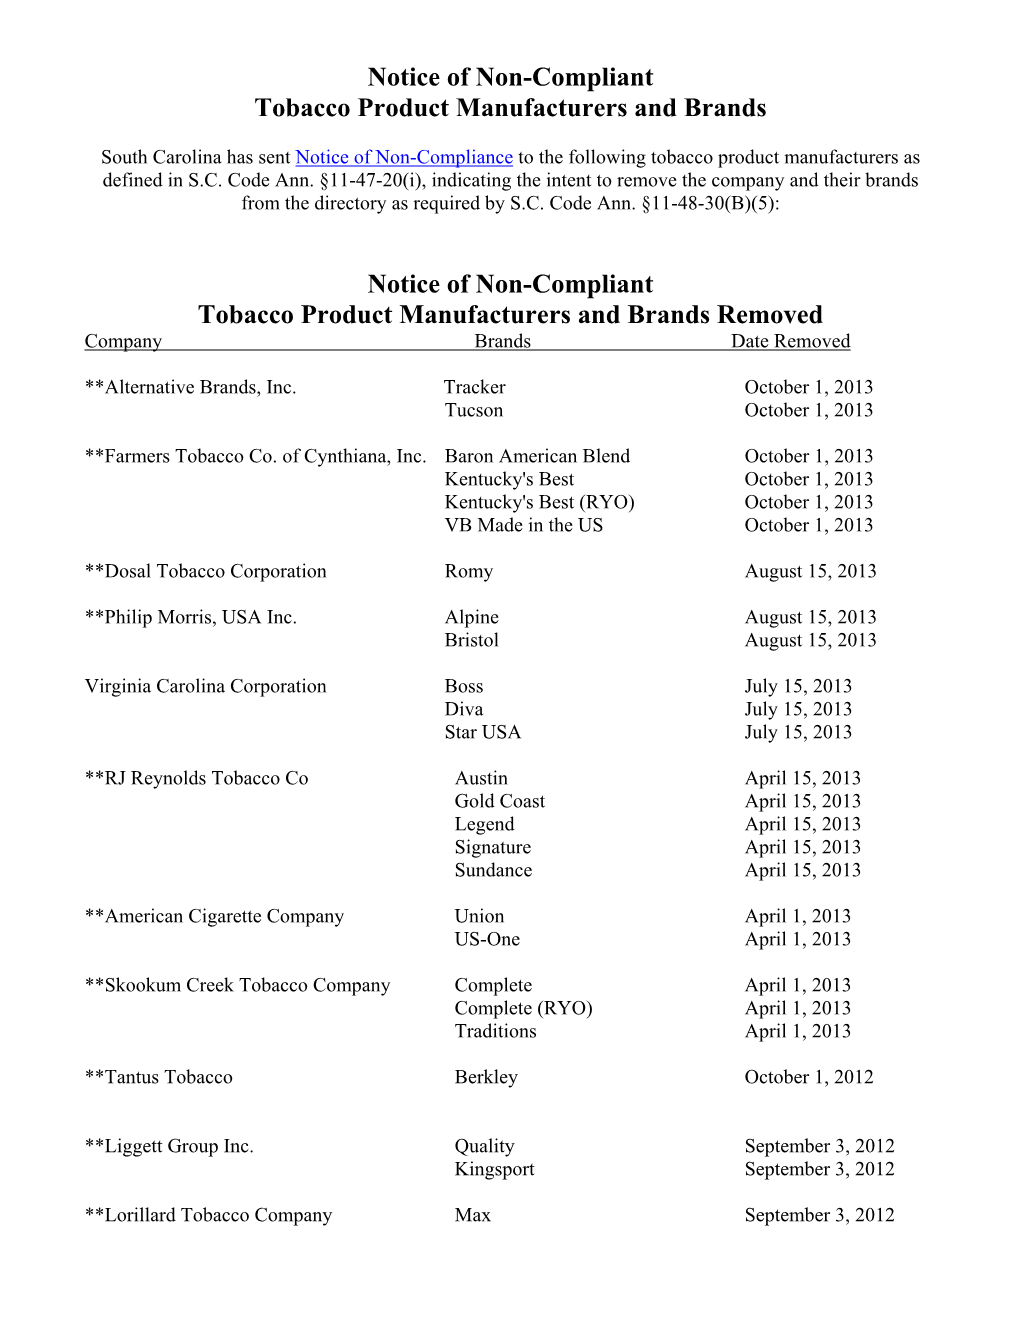 Notice of Non-Compliant Tobacco Product Manufacturers and Brands